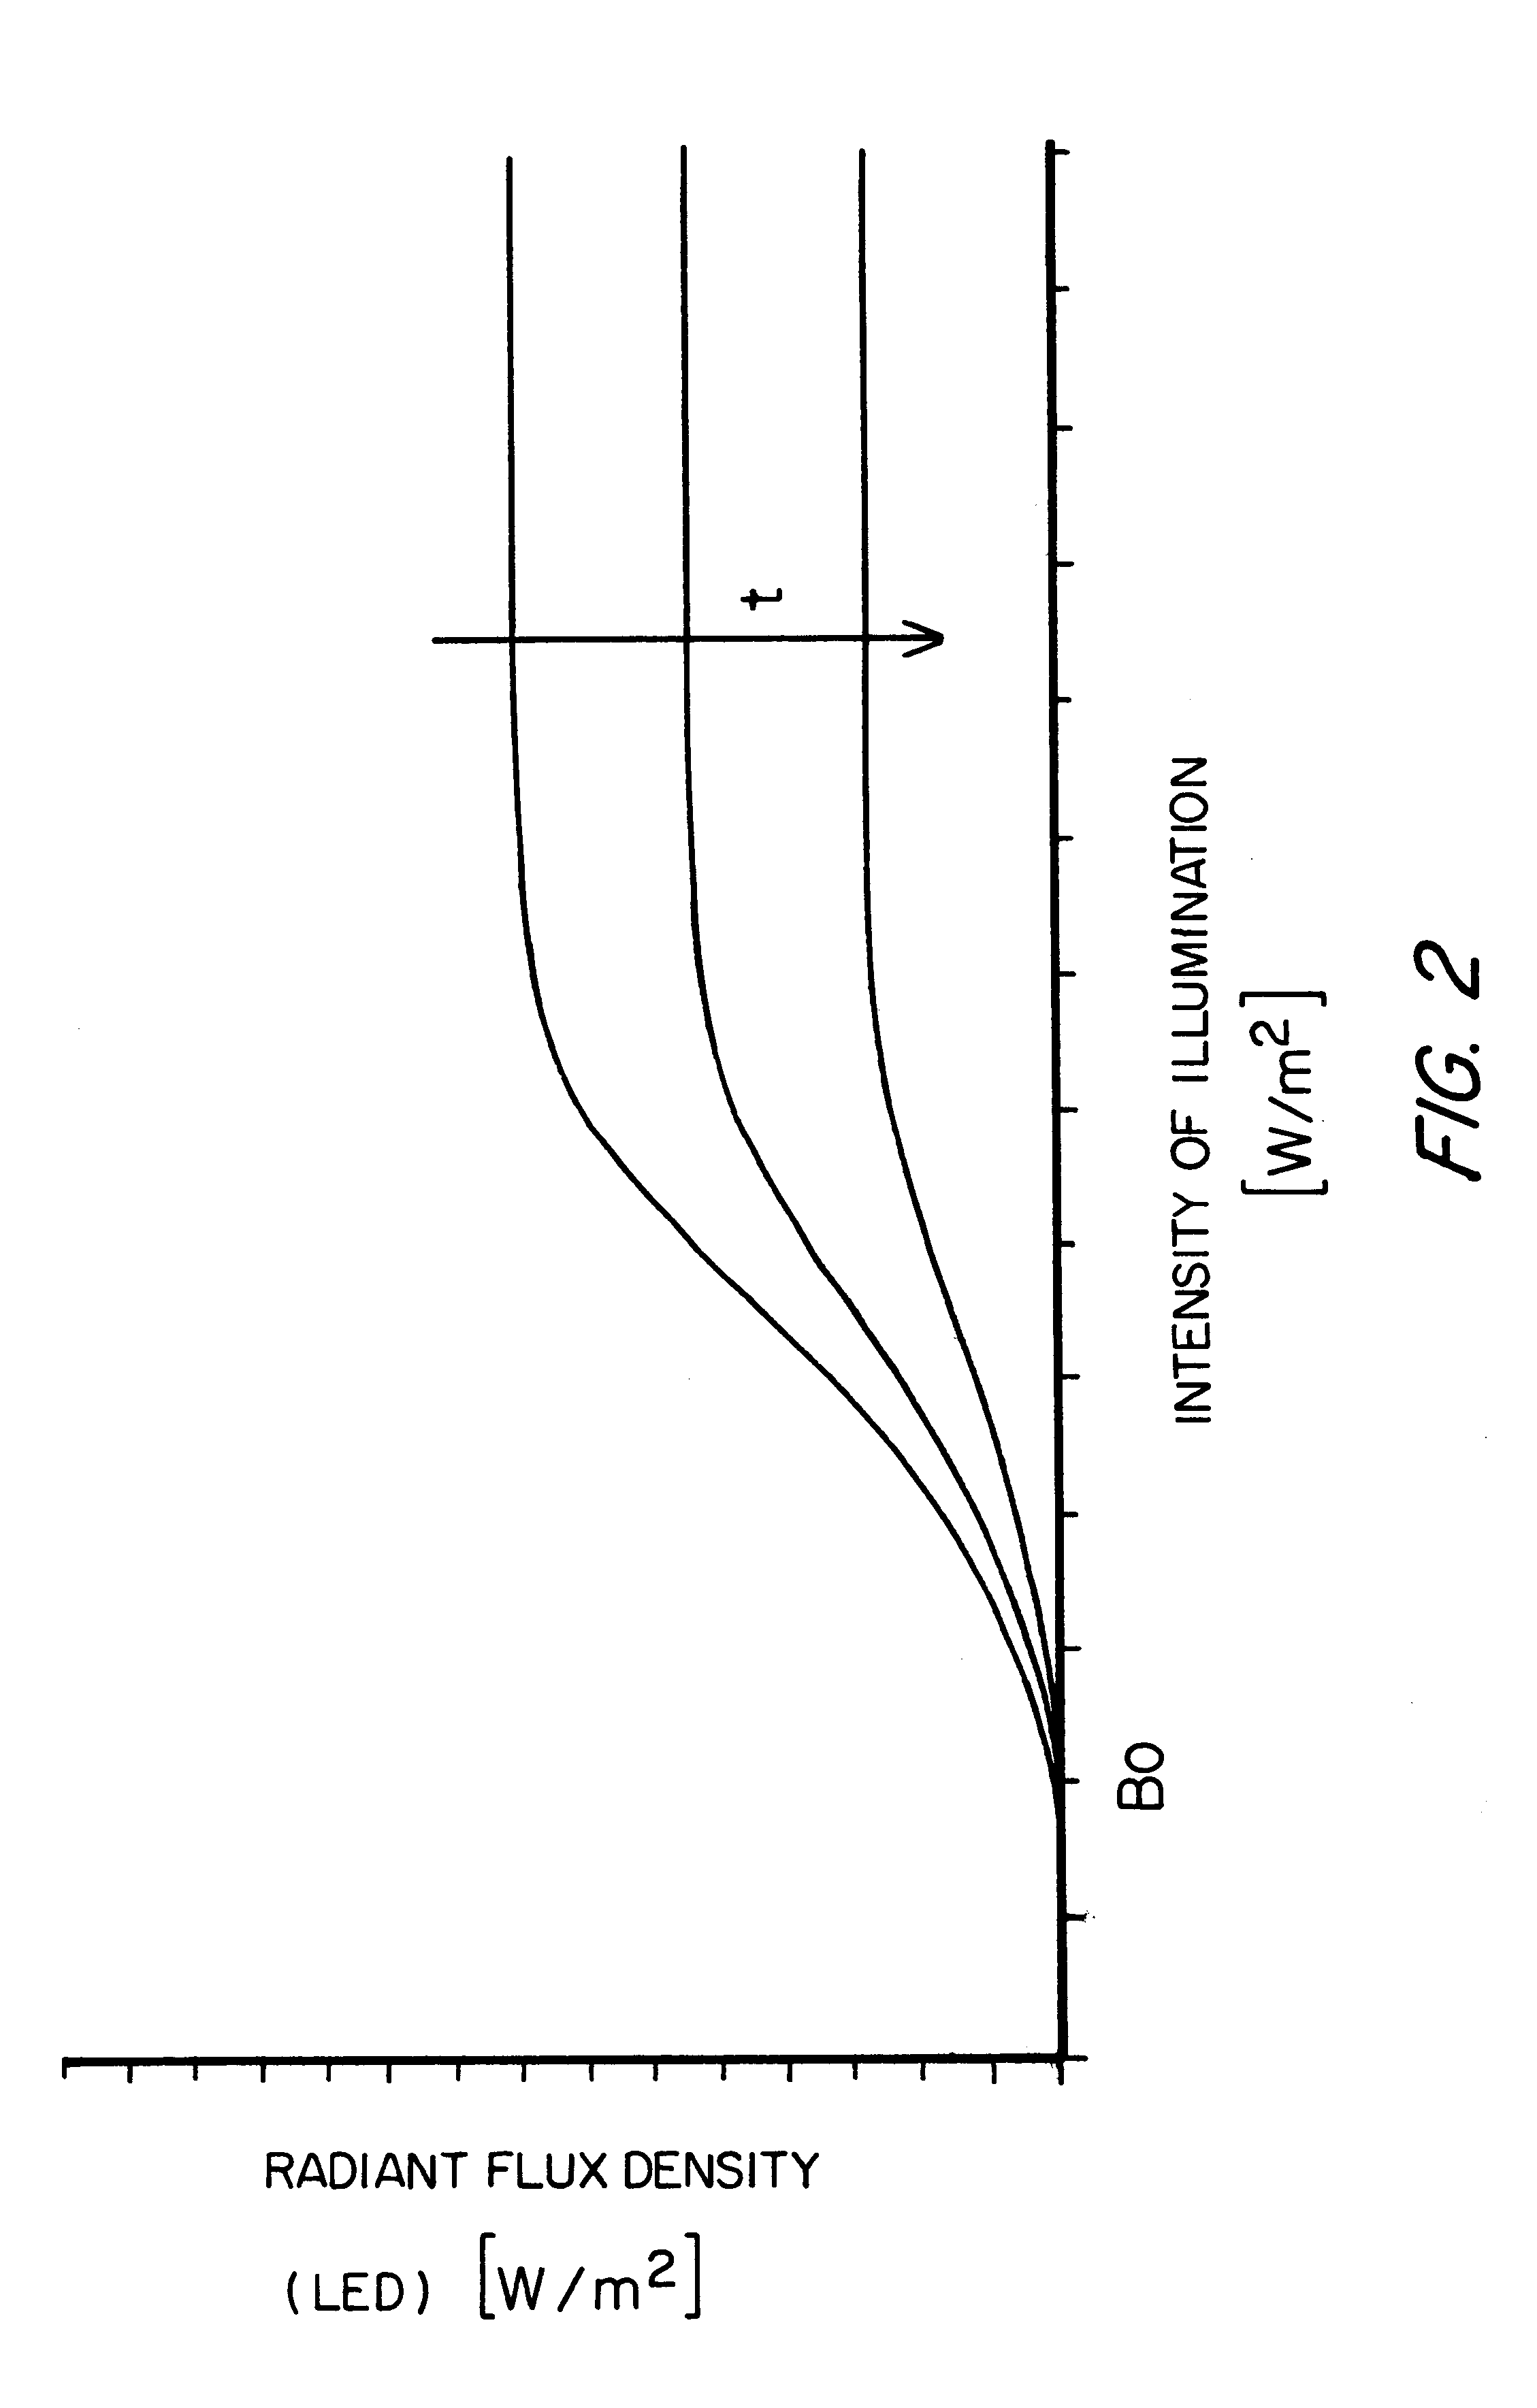 Testing and/or setting device for a photodynamic diagnosis or therapy system, or for training on such a system